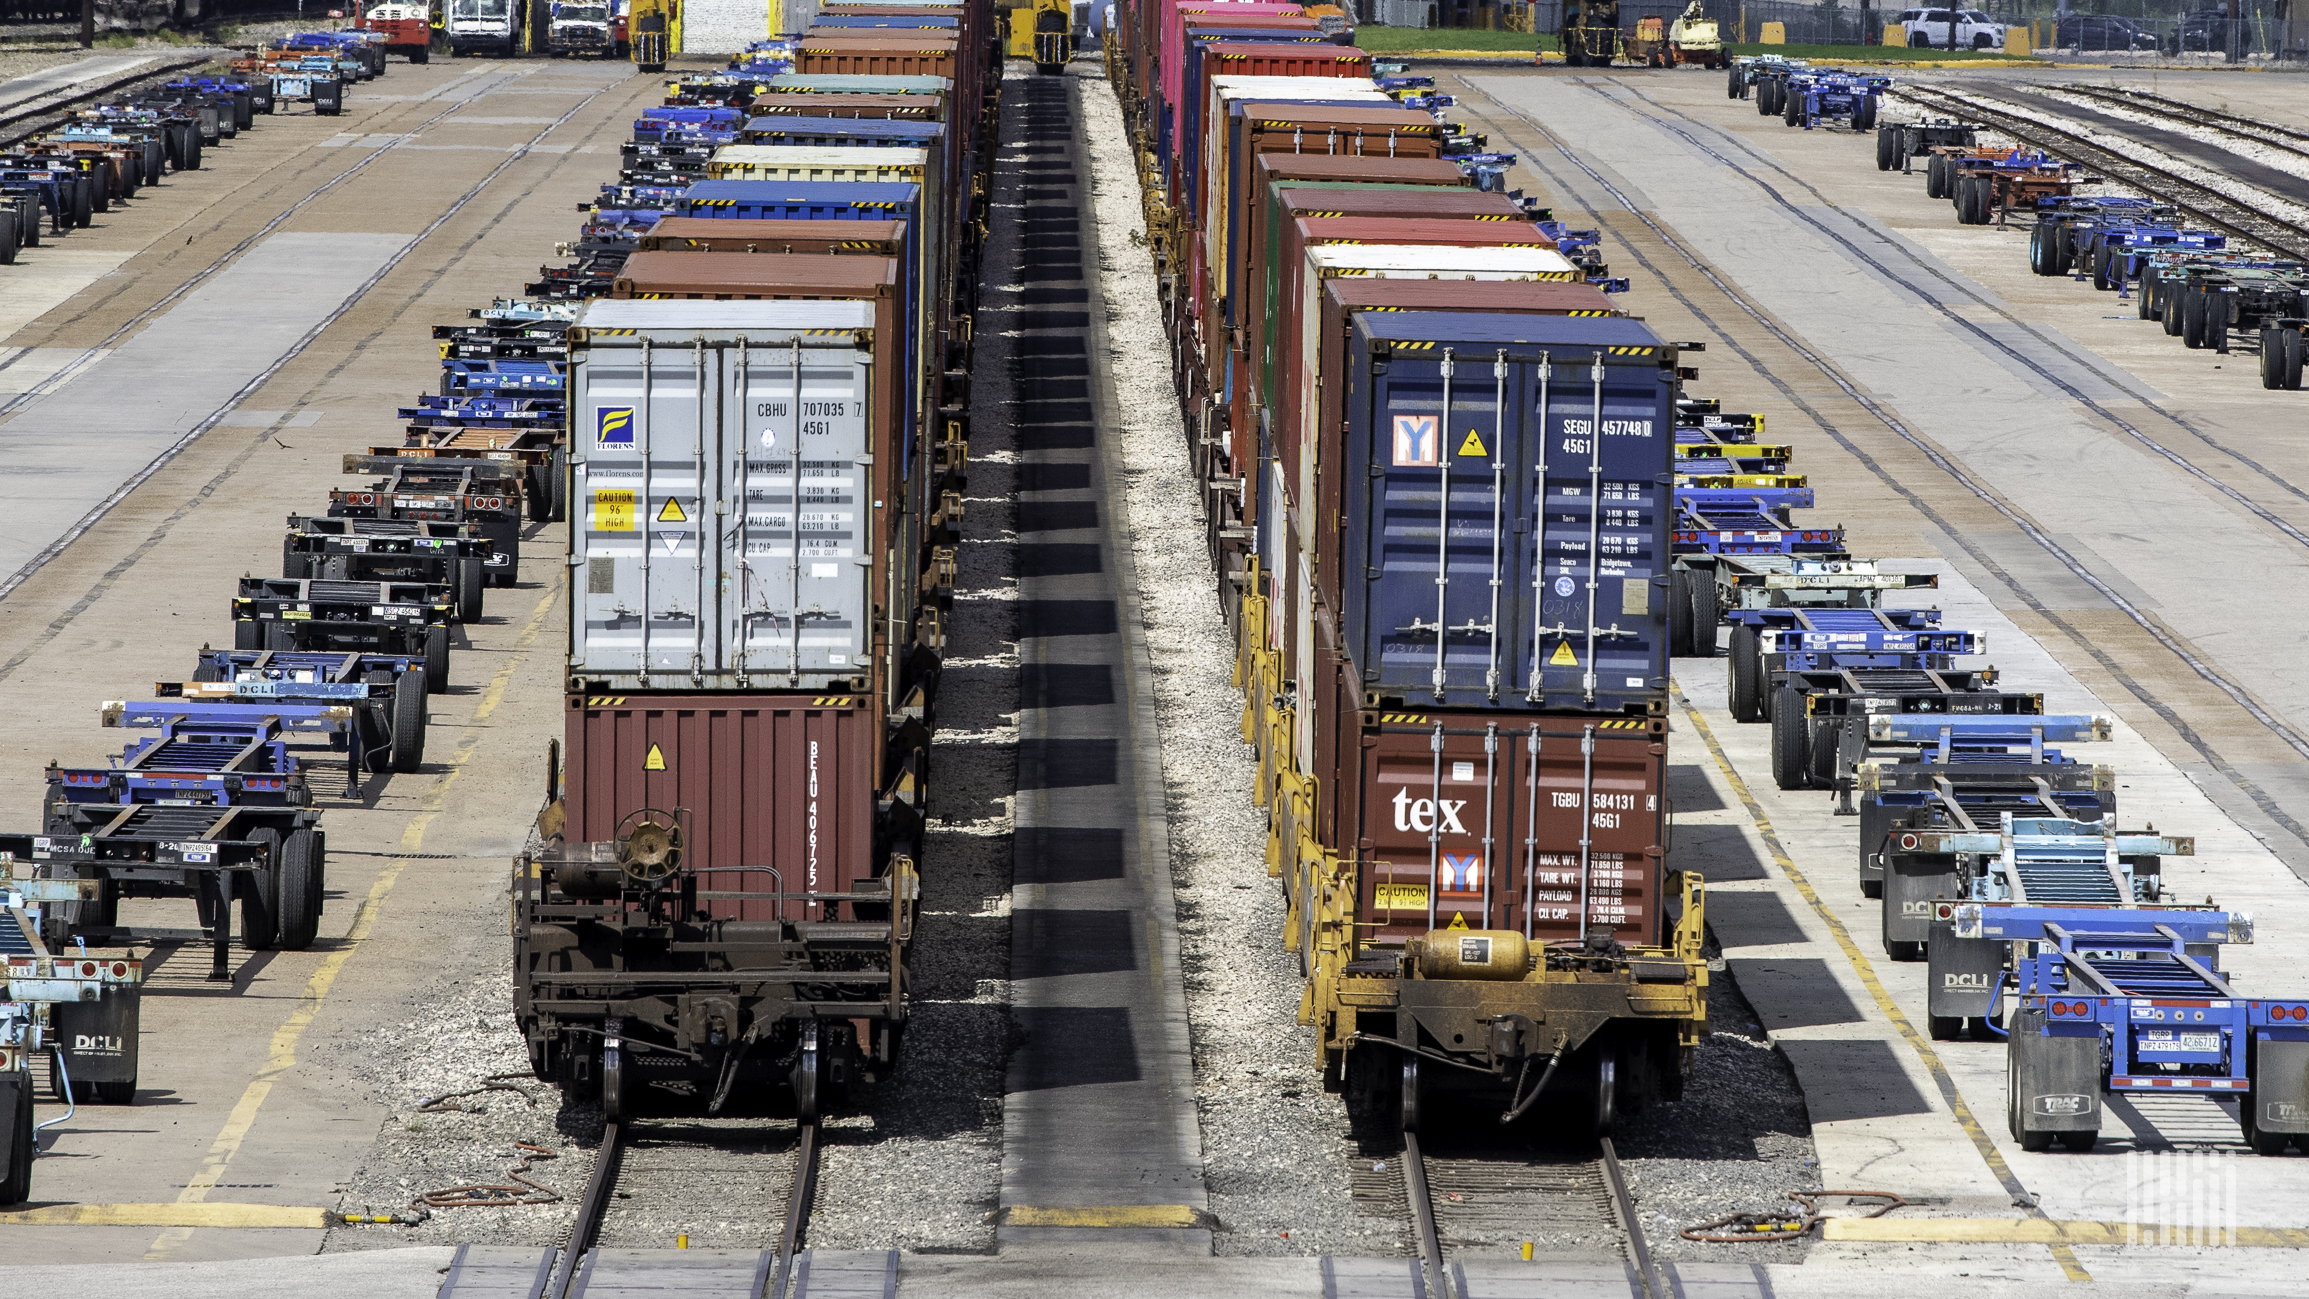 A photograph of containers parked in a rail yard.